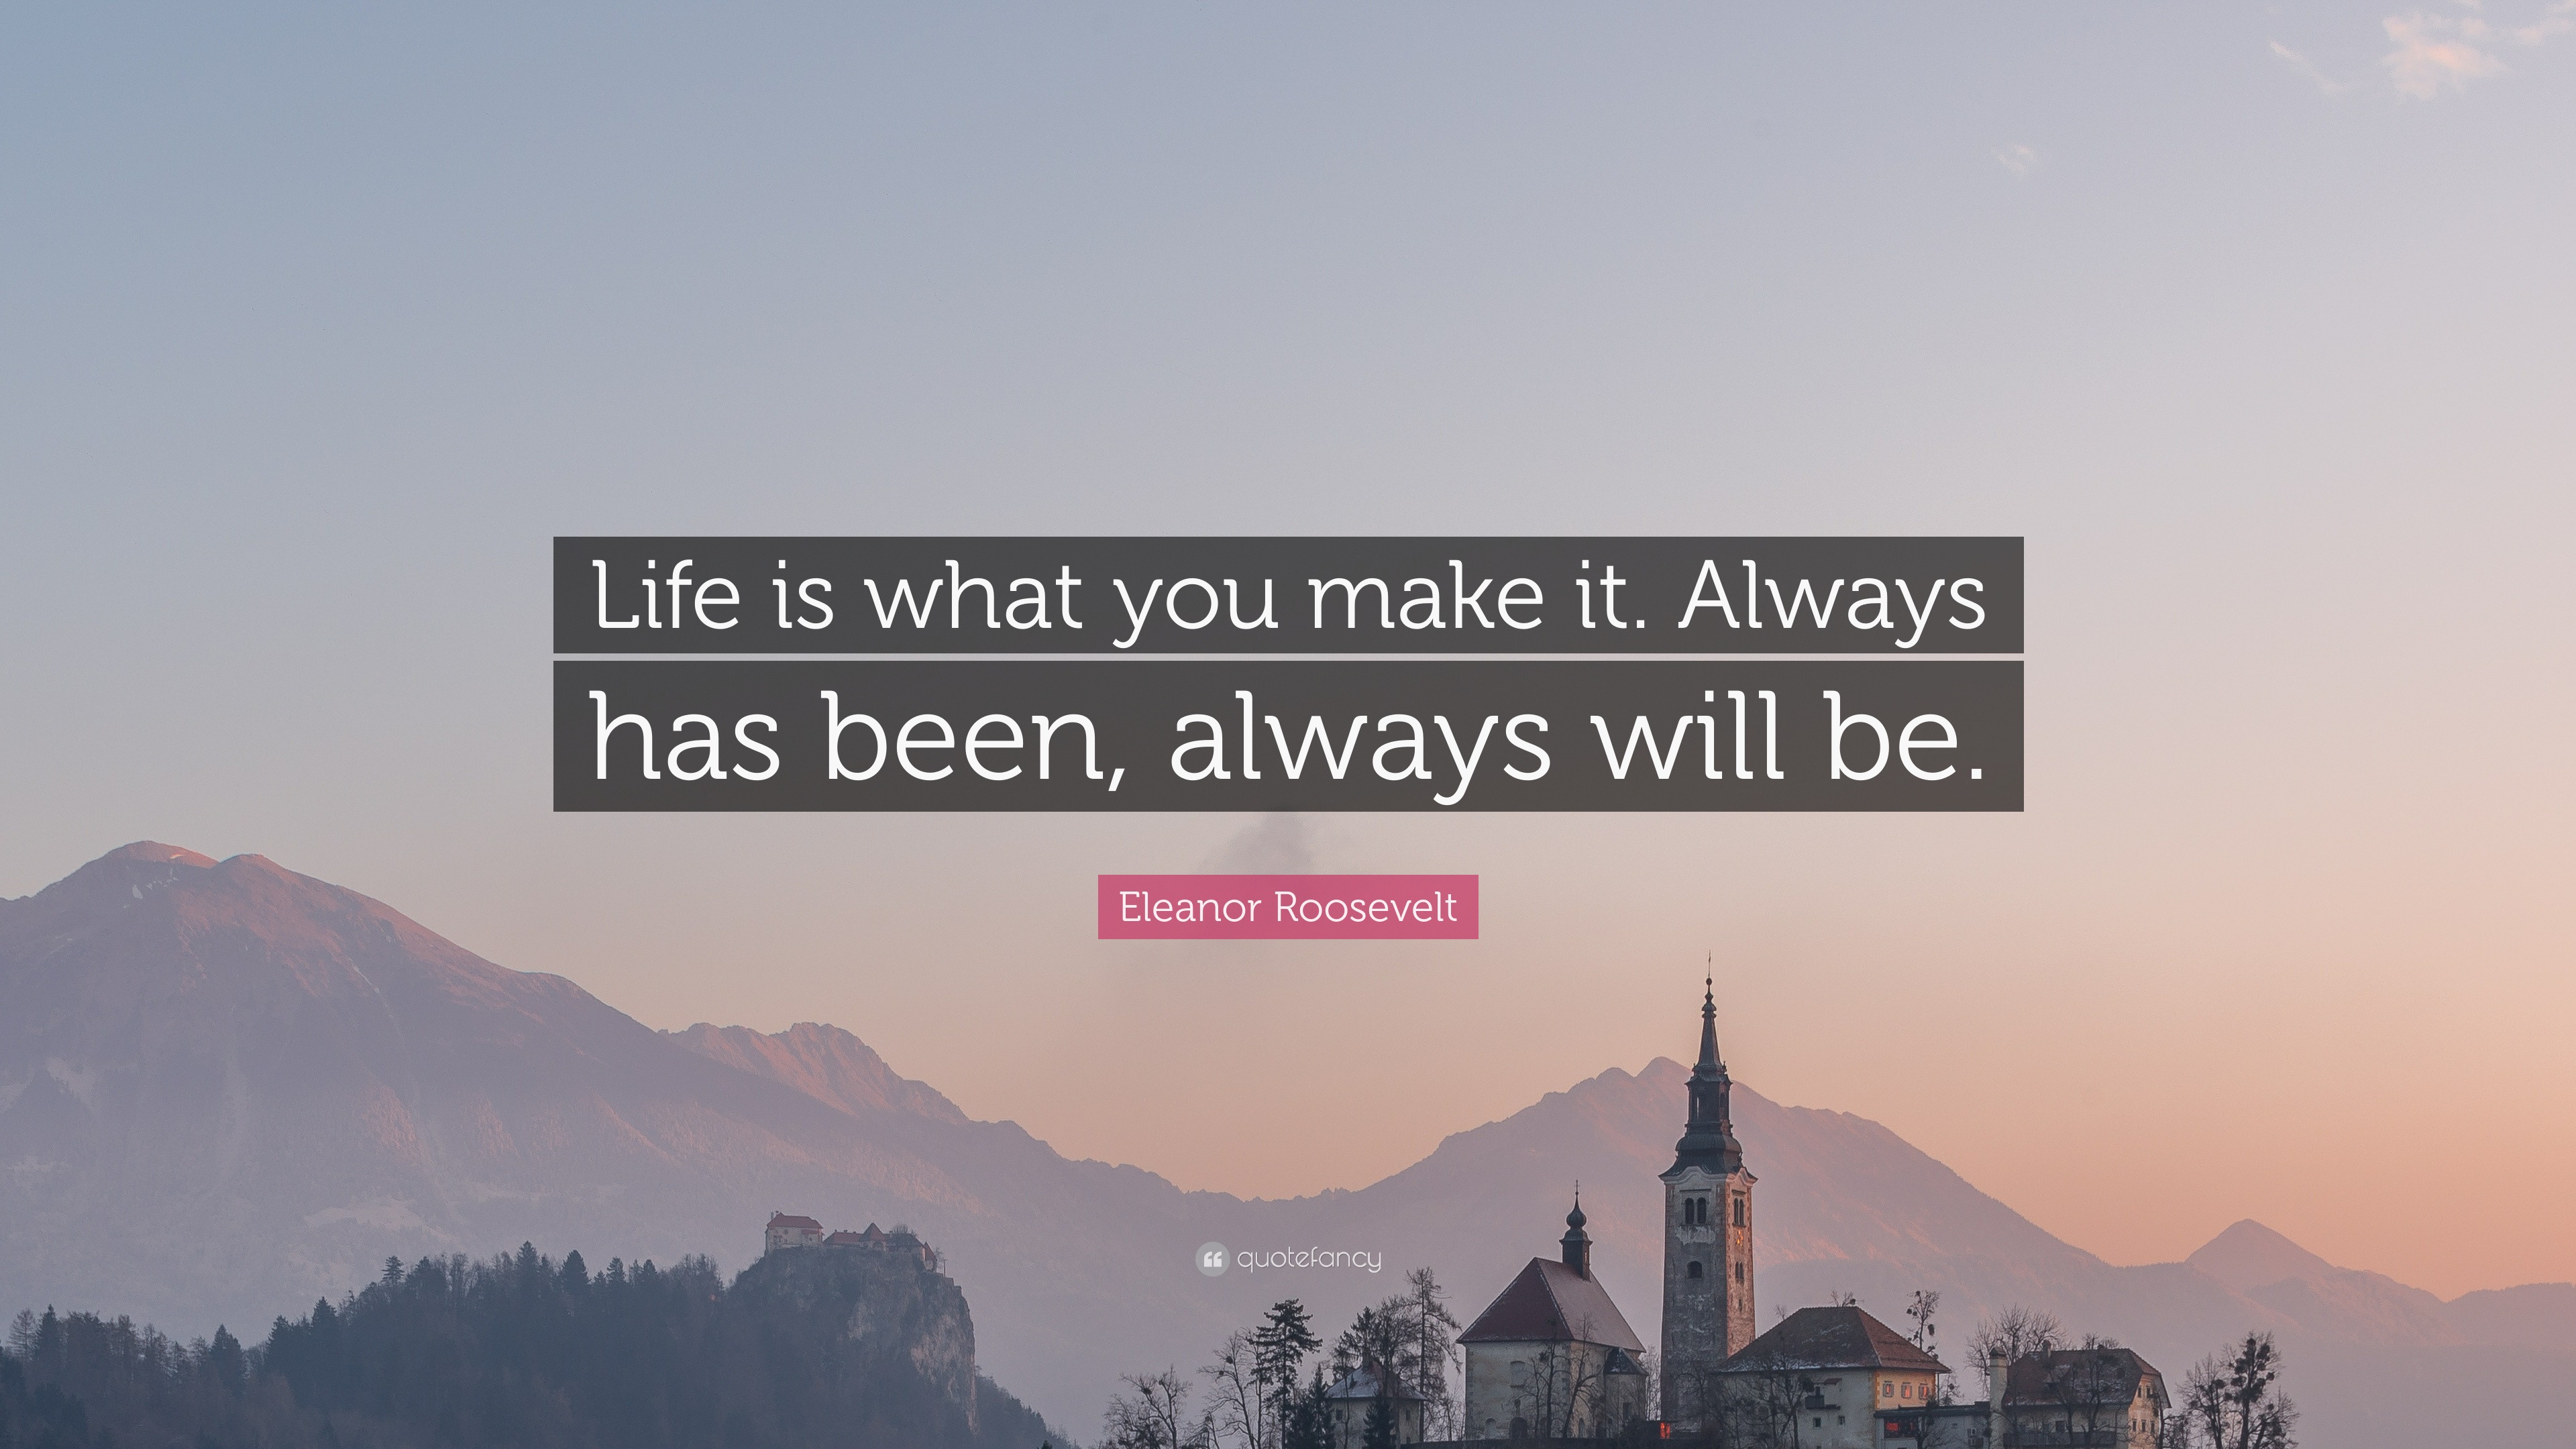 Eleanor Roosevelt Quote: "Life is what you make it. Always has been, always will be."